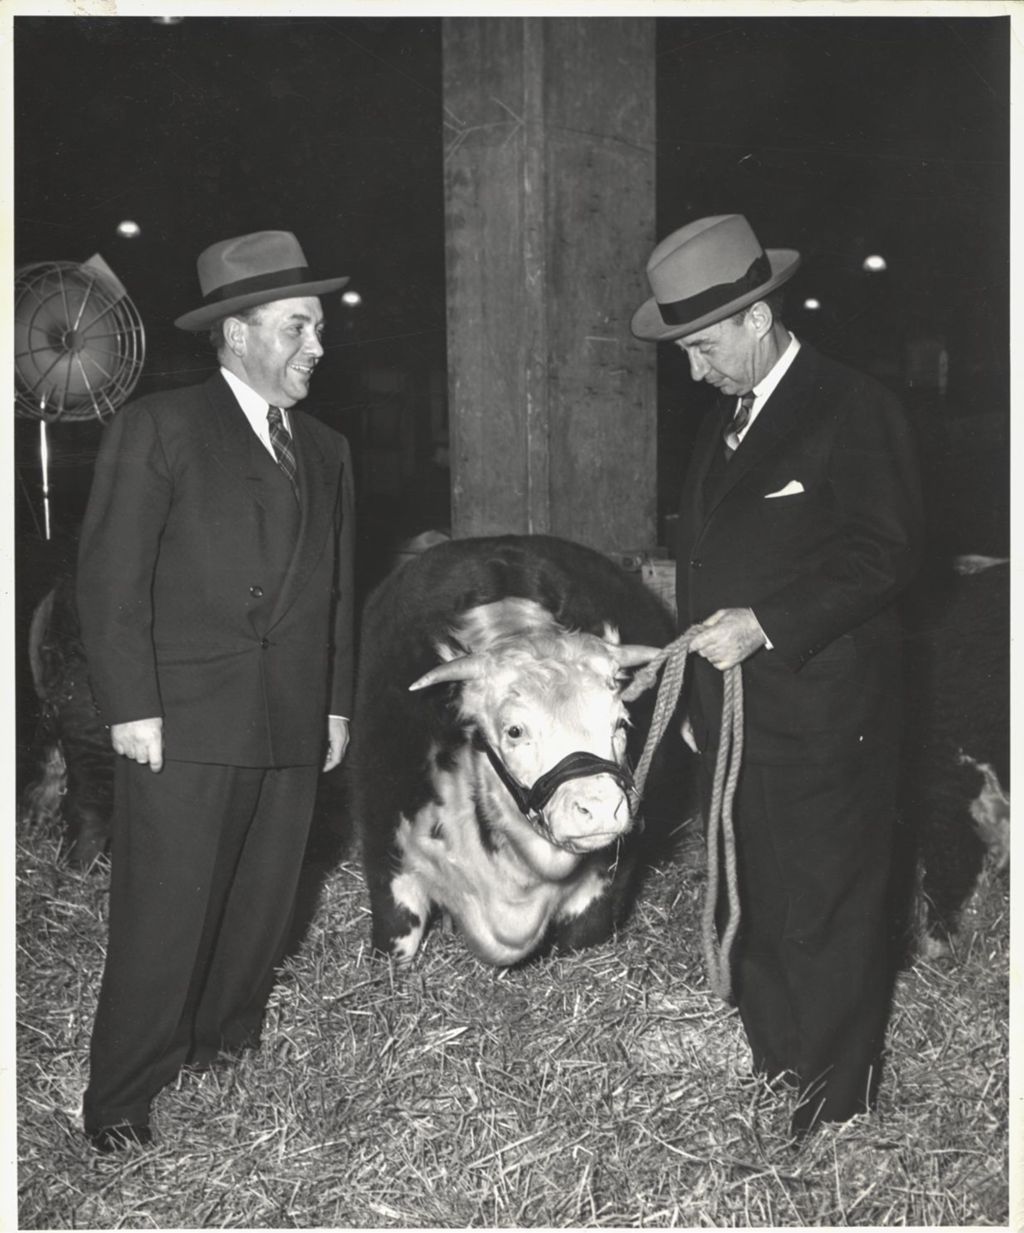 Richard J. Daley and Adlai Stevenson review cattle at a stock show